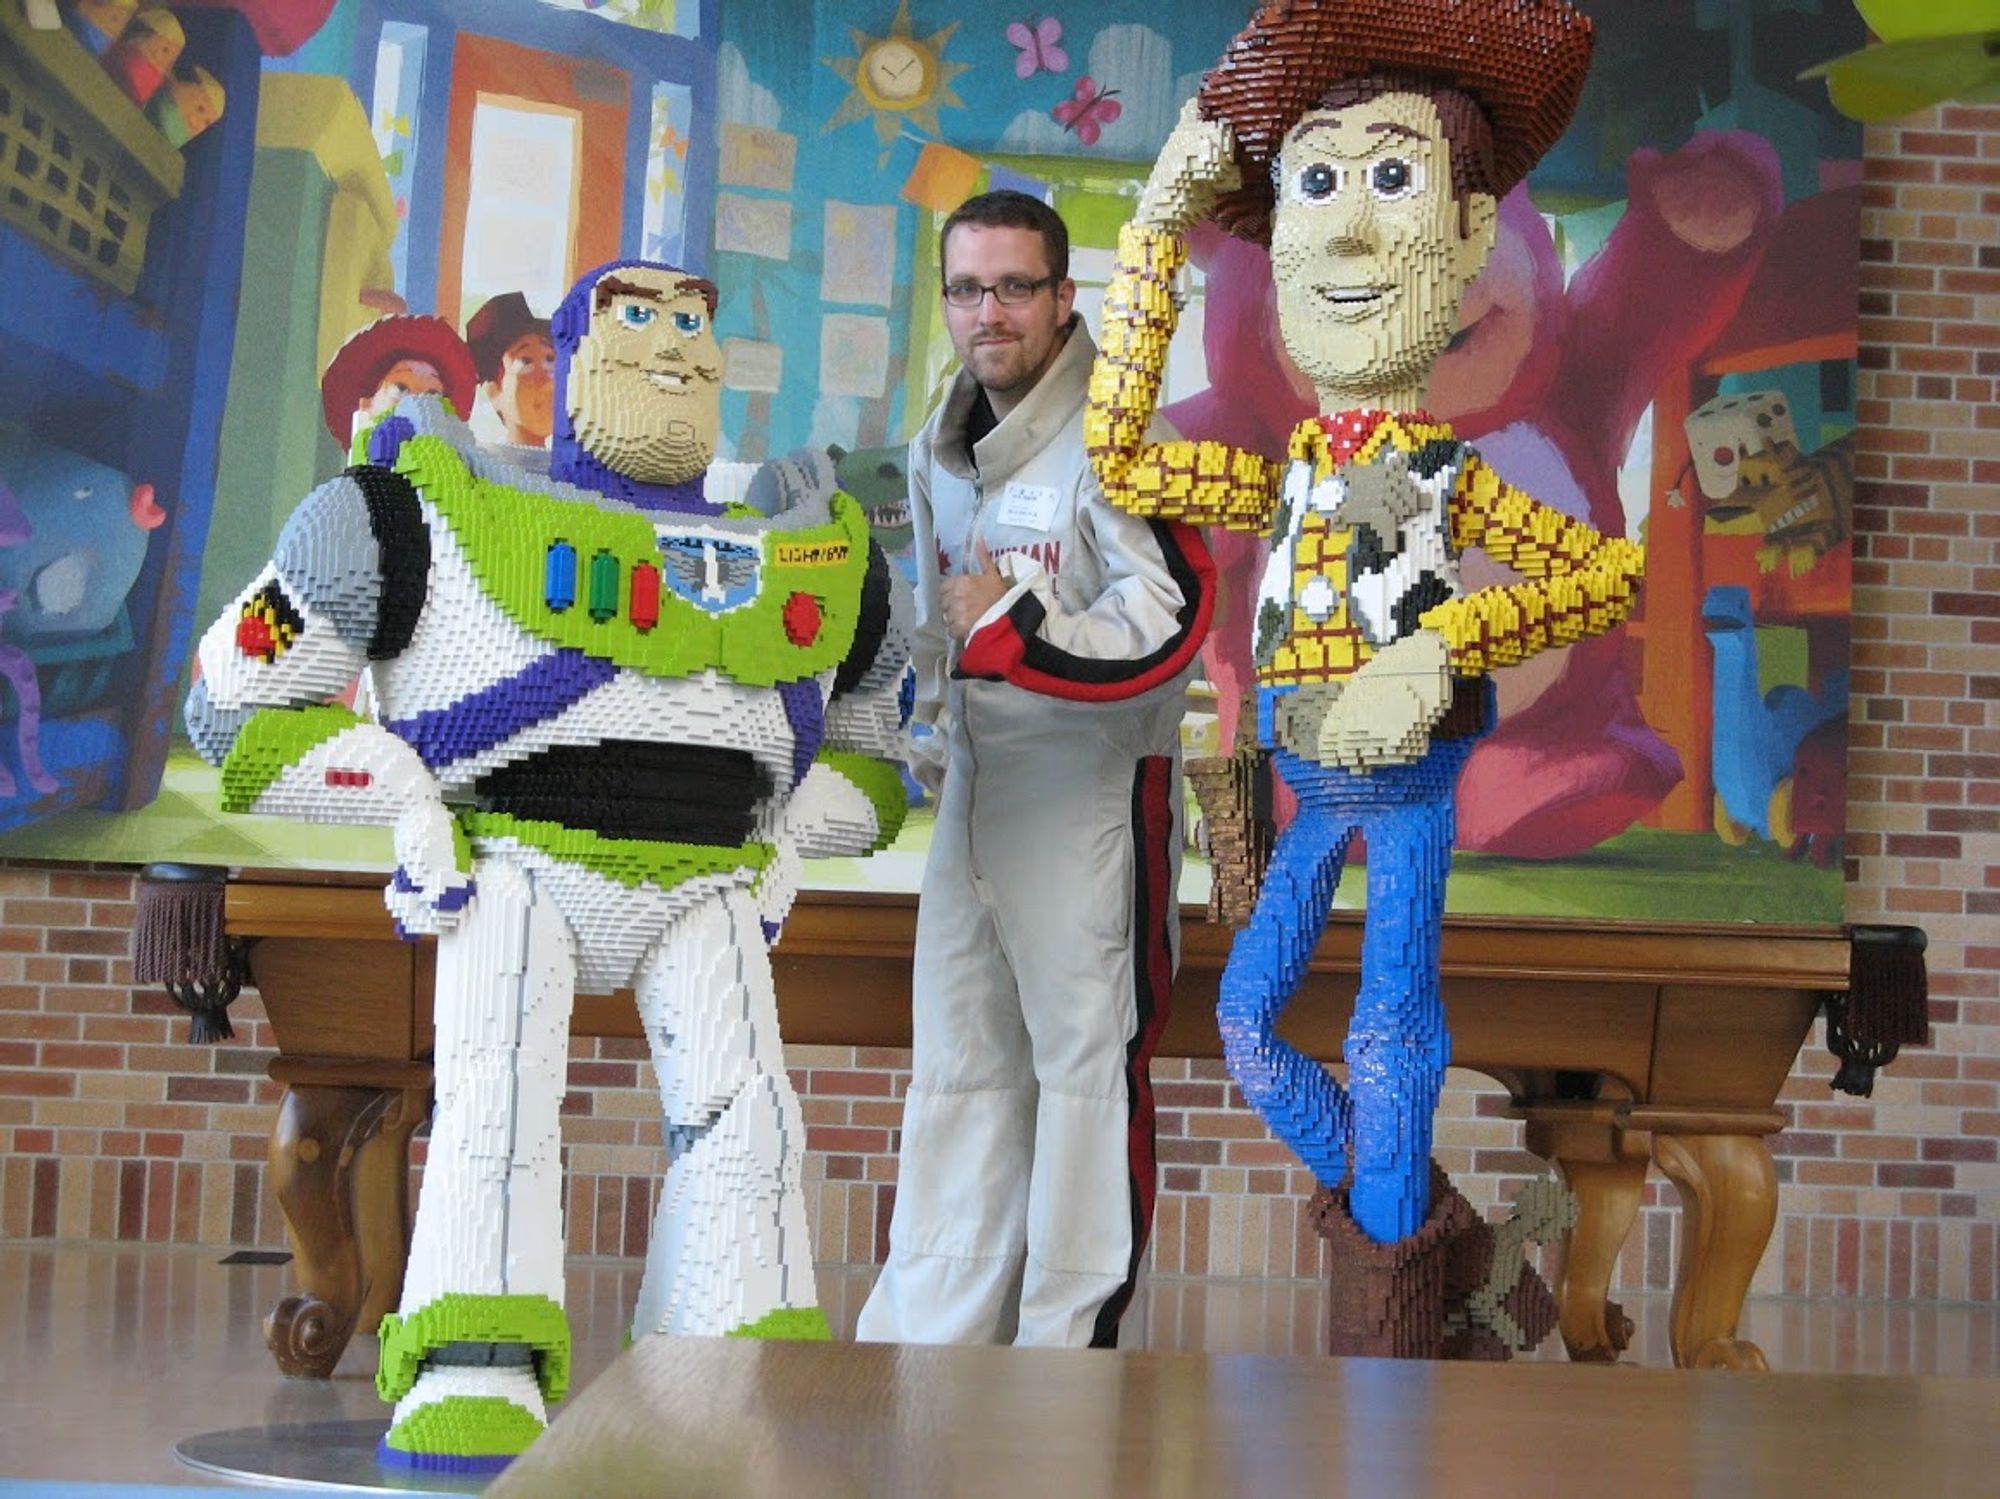 Nick the Human Cannonball poses at Pixar with Lego Buzz & Woody